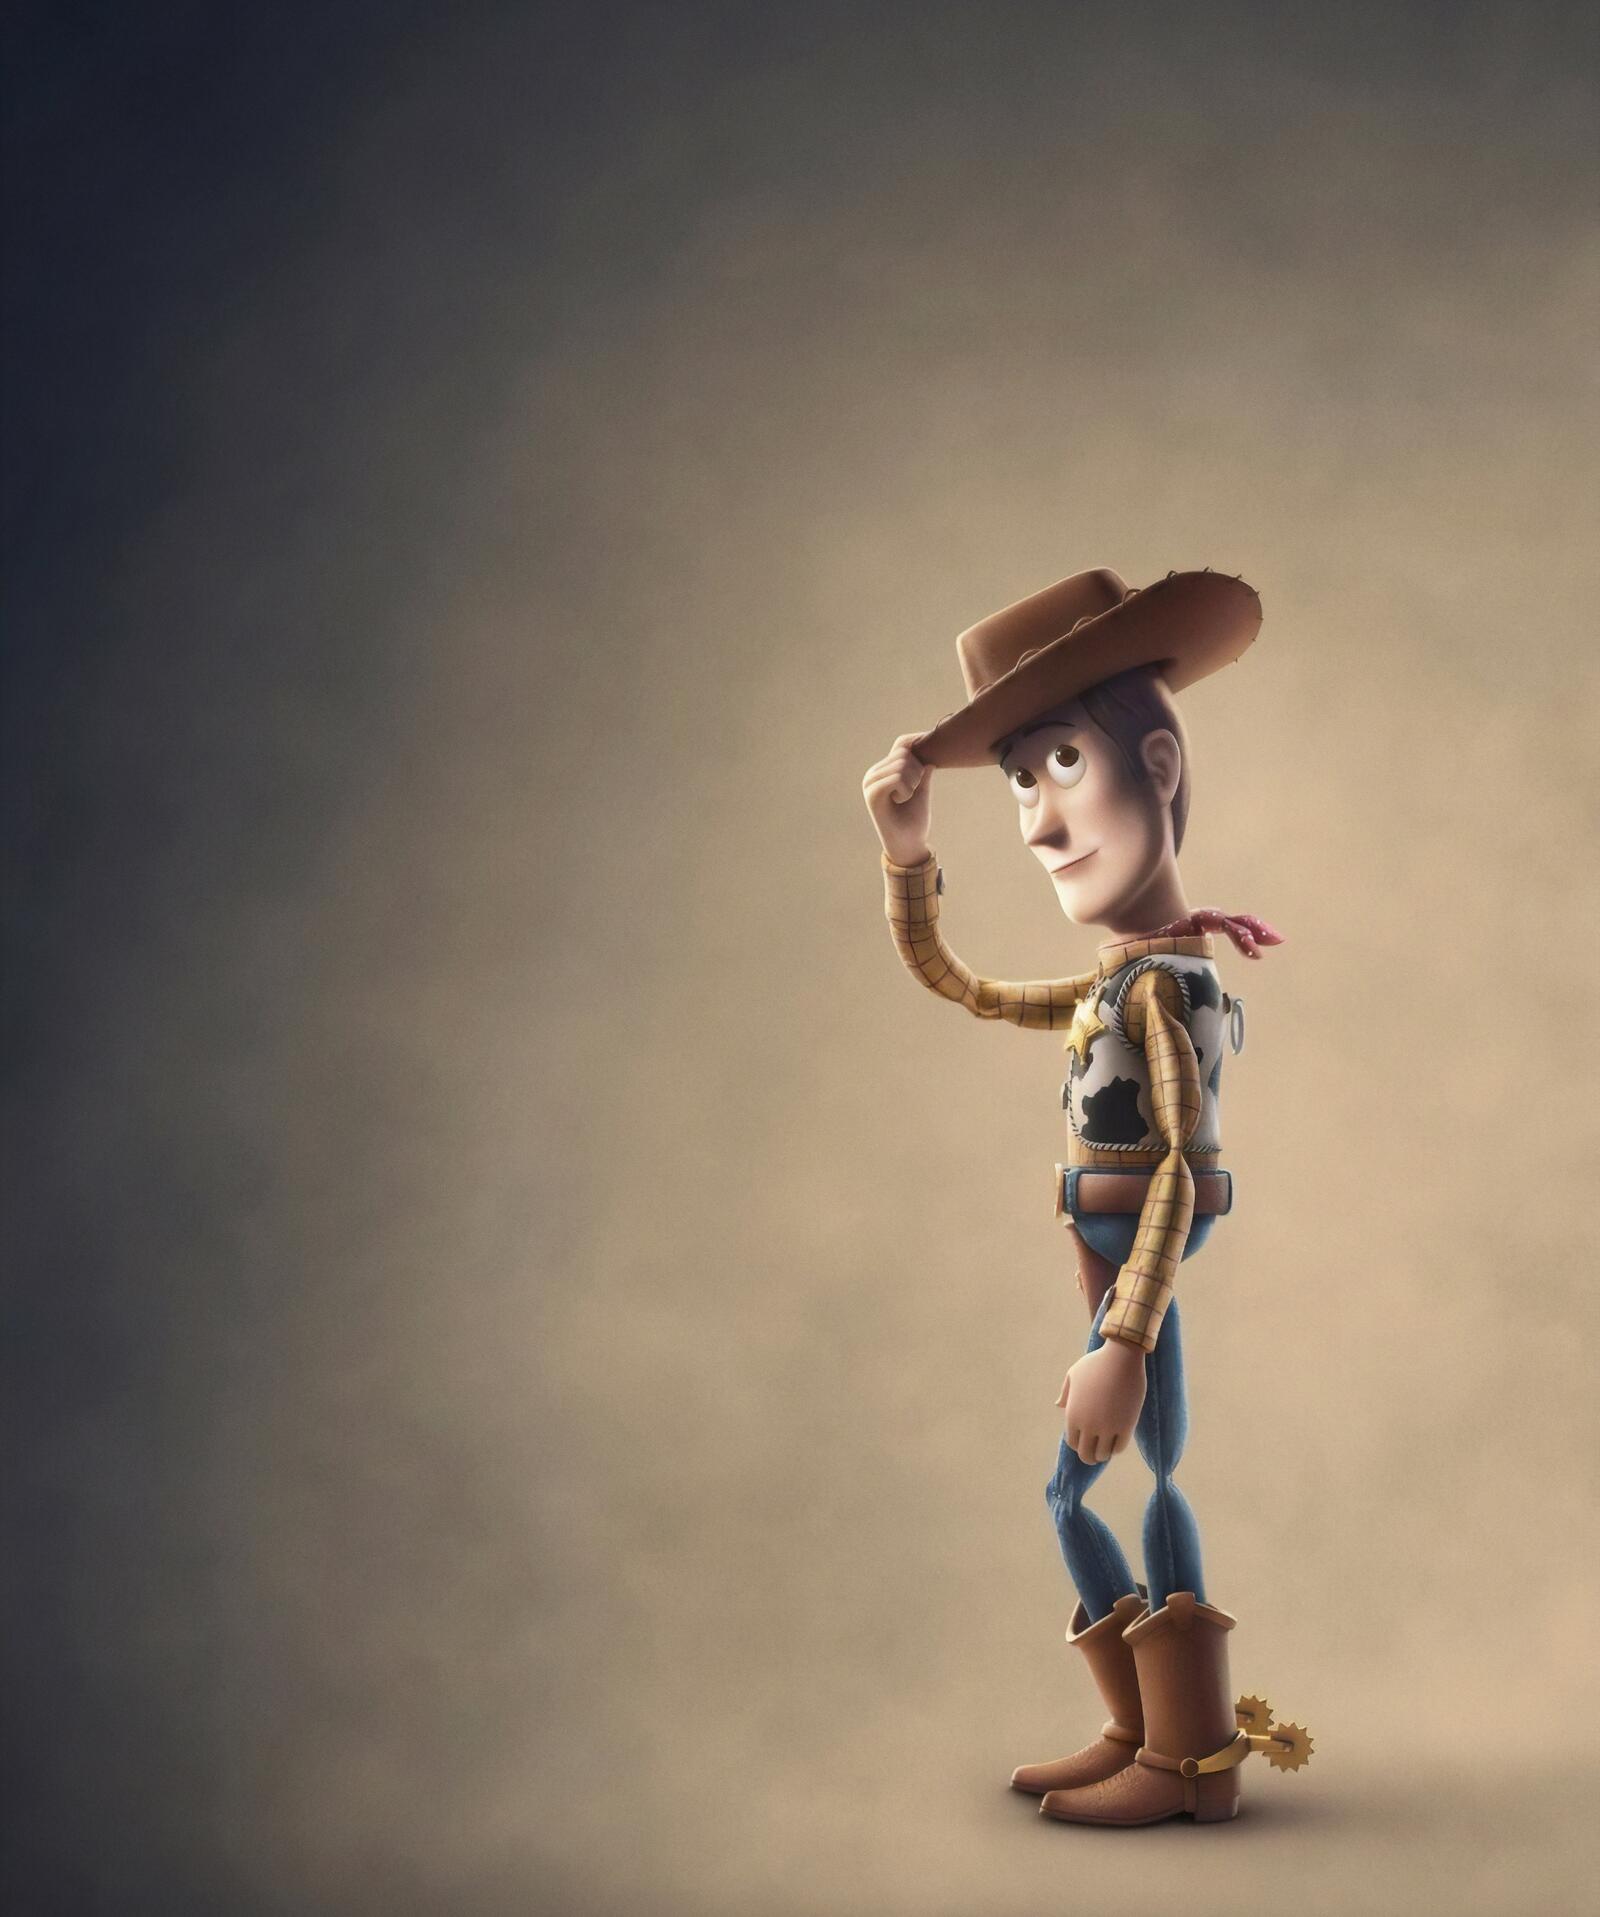 Wallpapers toy story 4 animation wallpaper sheriff woody on the desktop